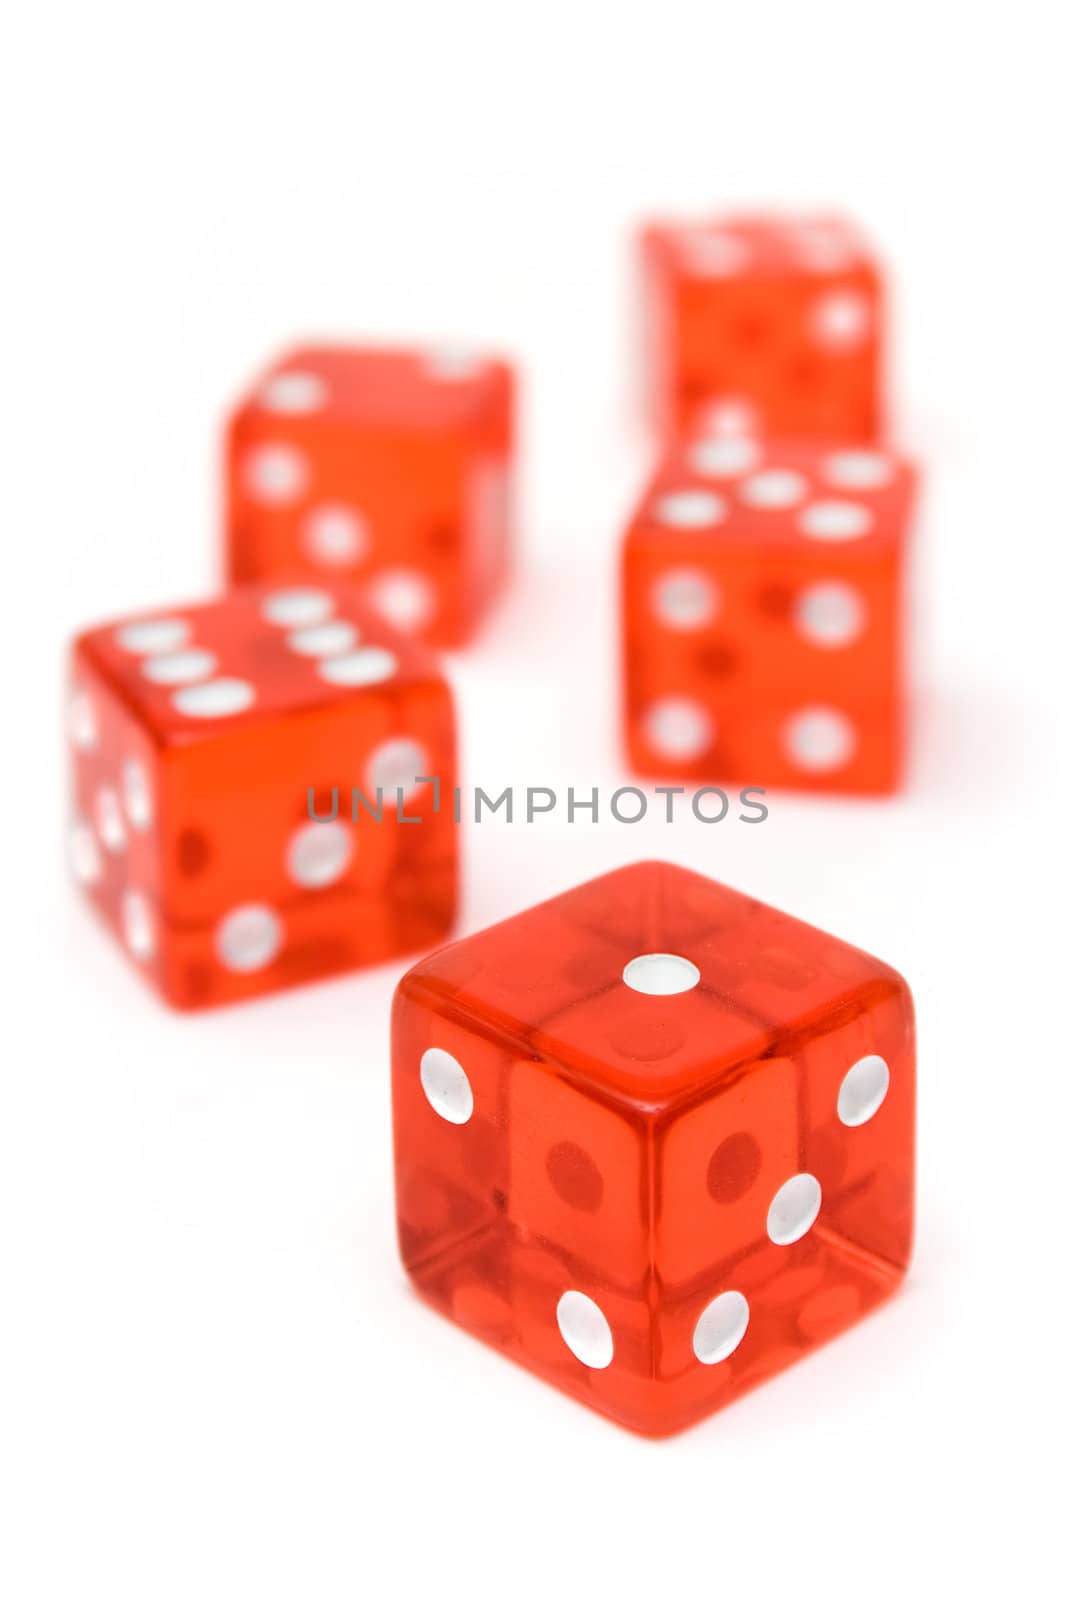 Translucent dice isolated on a white background. Shallow depth of field.